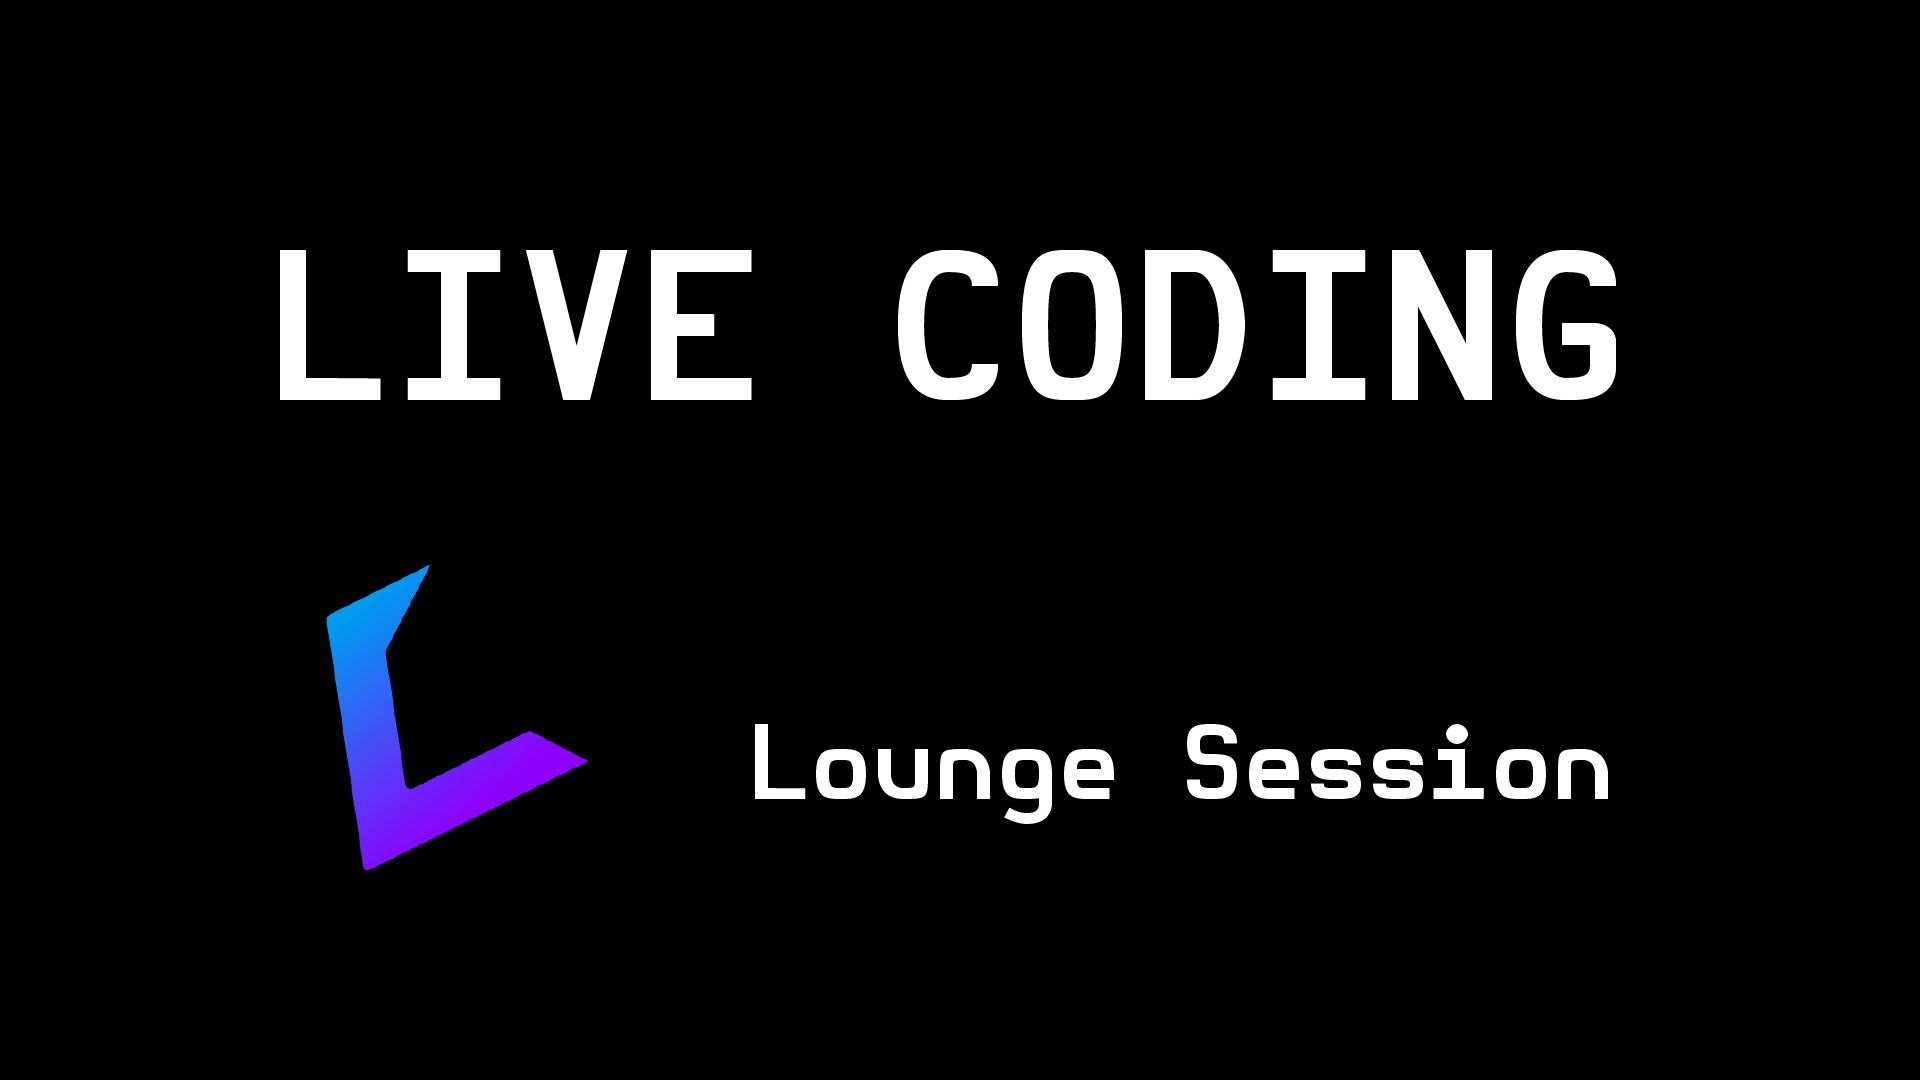 LIVE CODING - Working on Various Projects